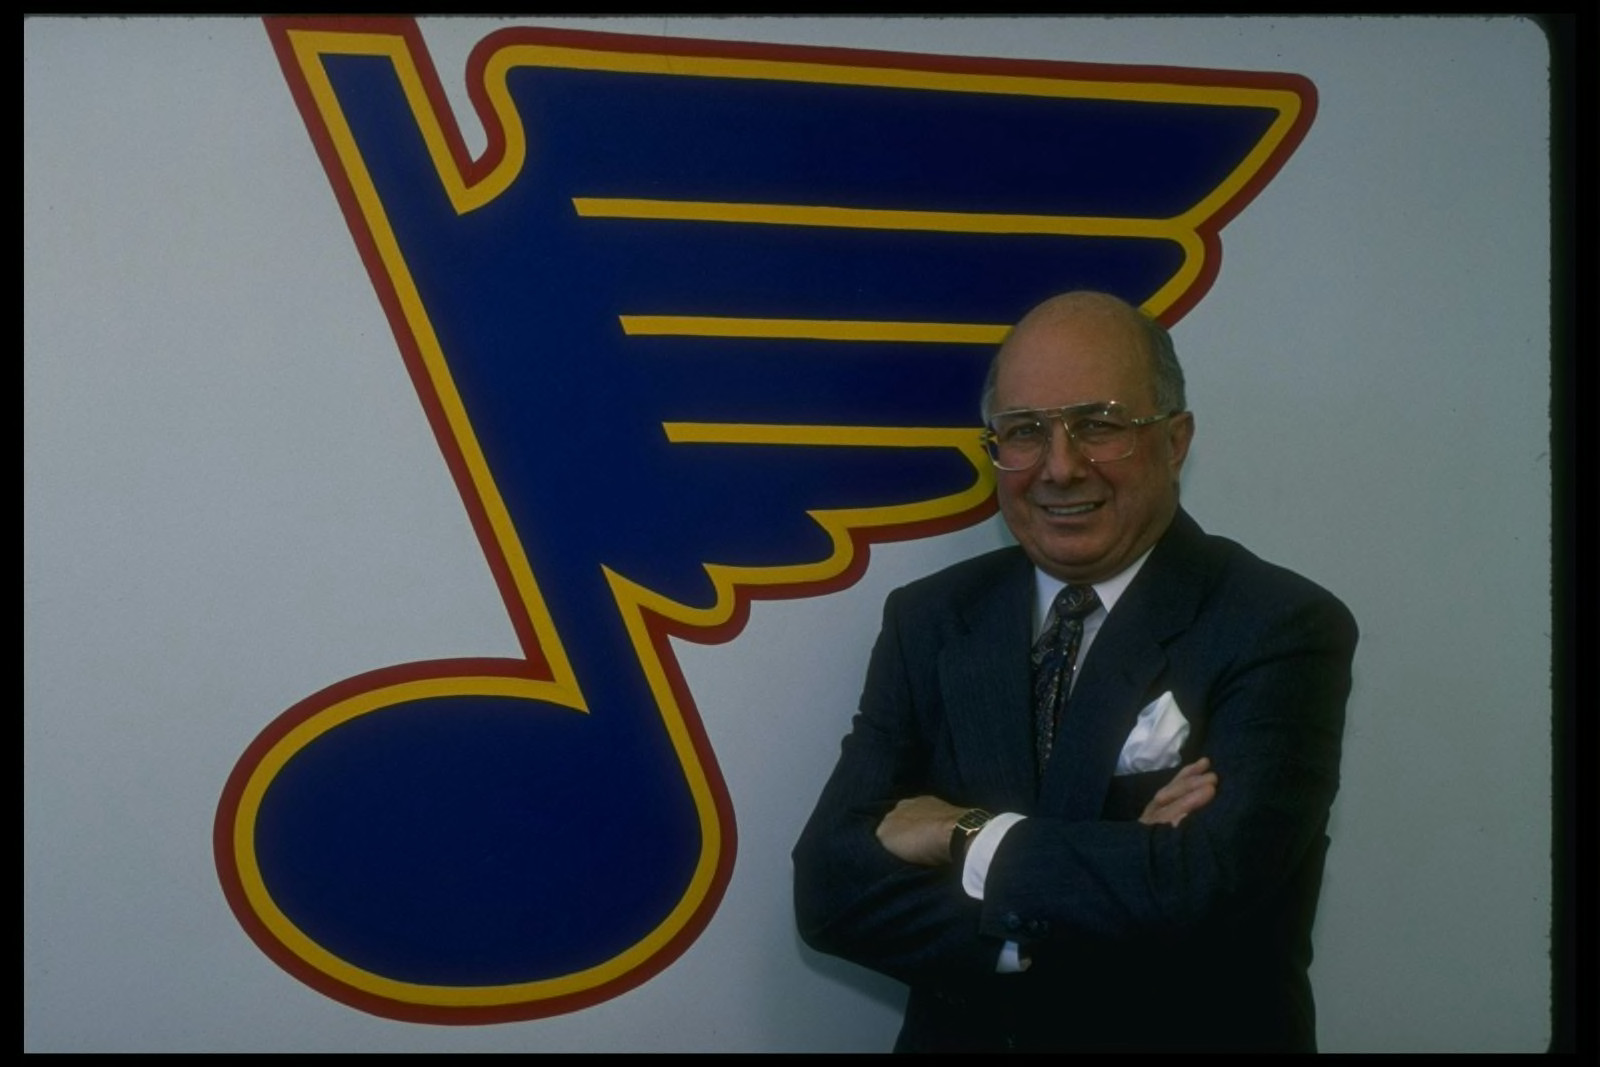 How Mike Keenan ruined what could have been a St. Louis Blues